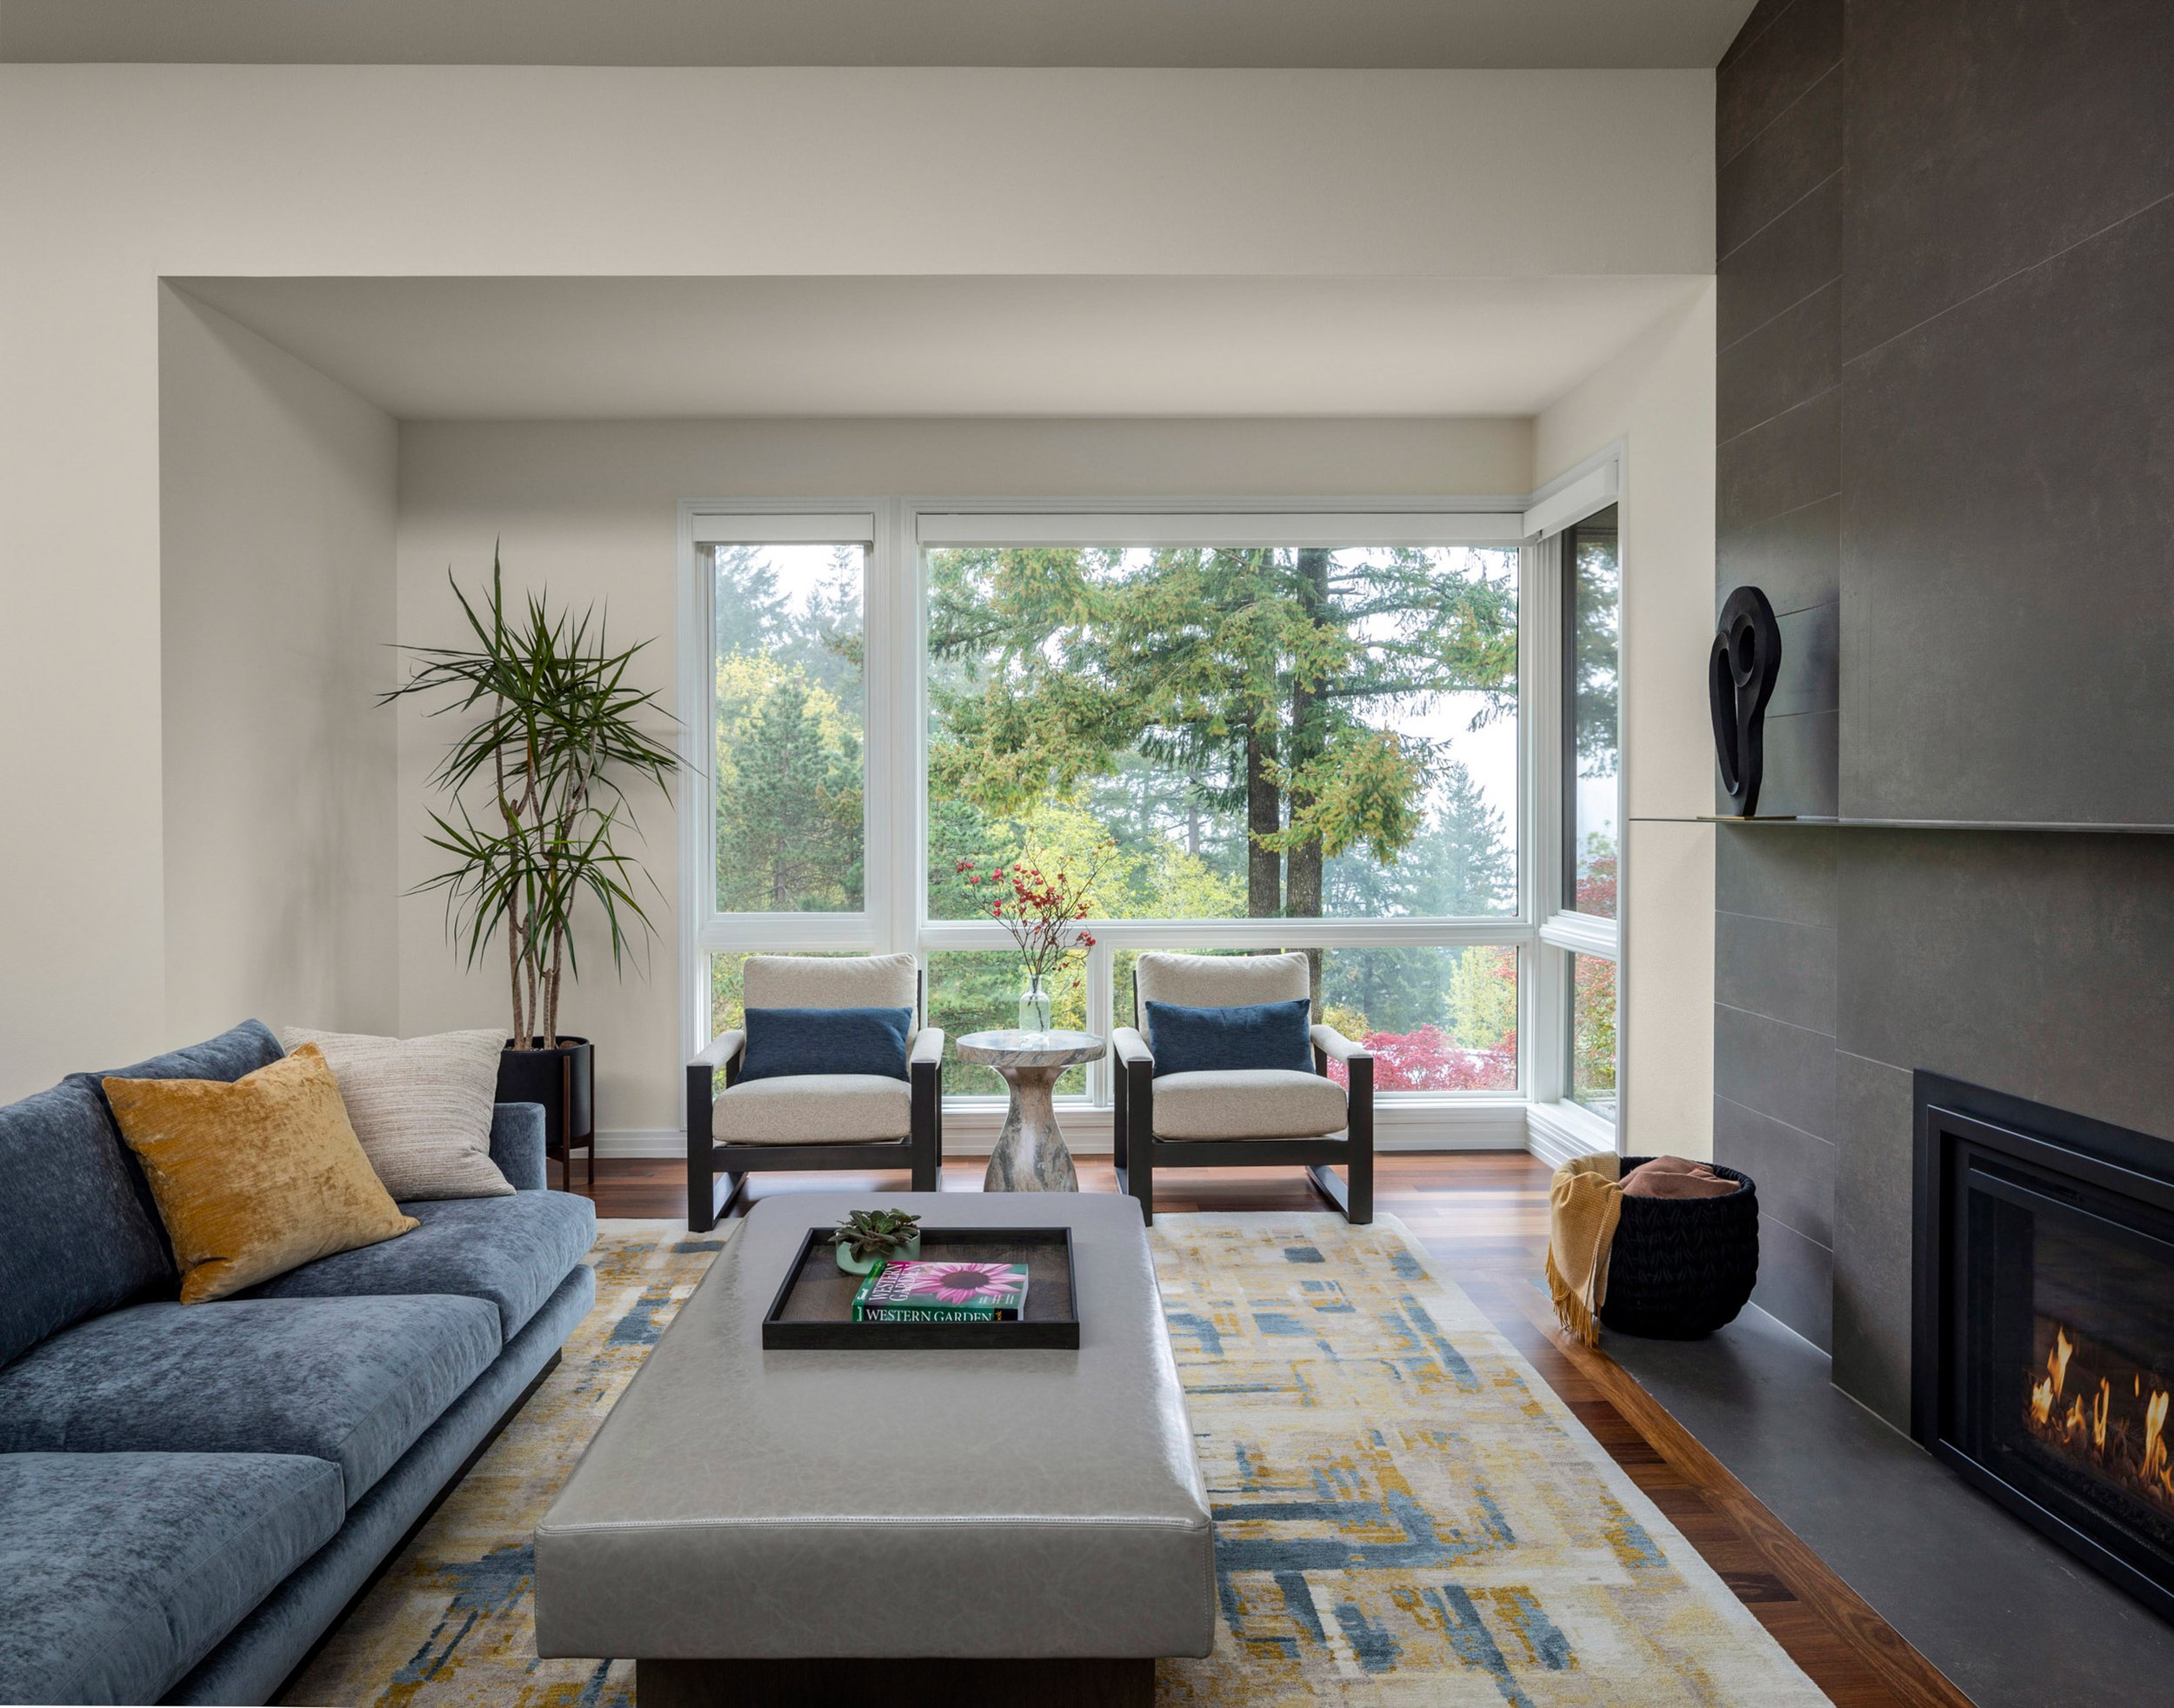 Modern, contemporary living room with Pacific Northwest Interior Design